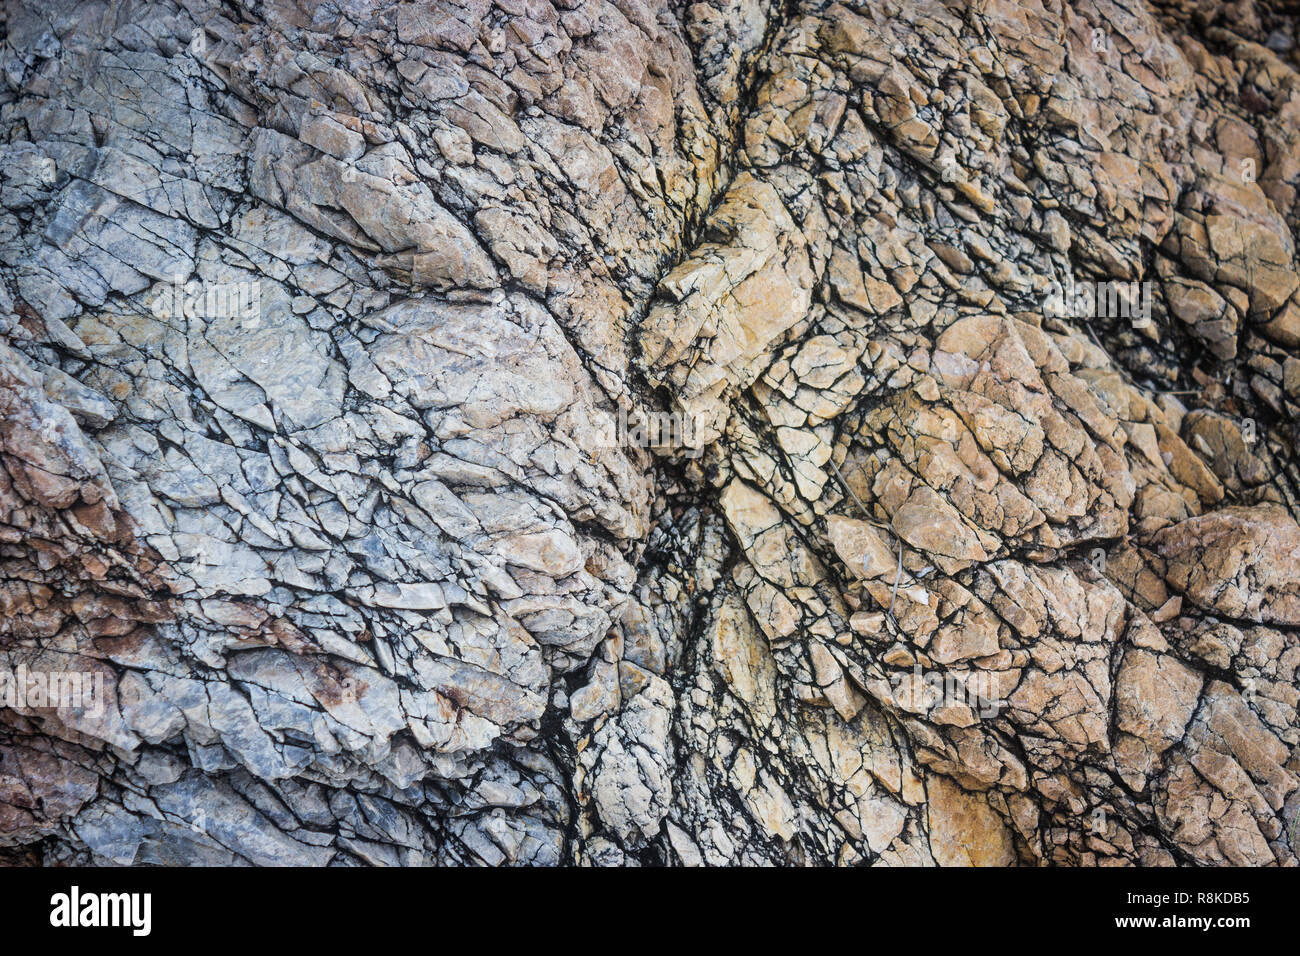 Stone or rock texture and background. Stock Photo